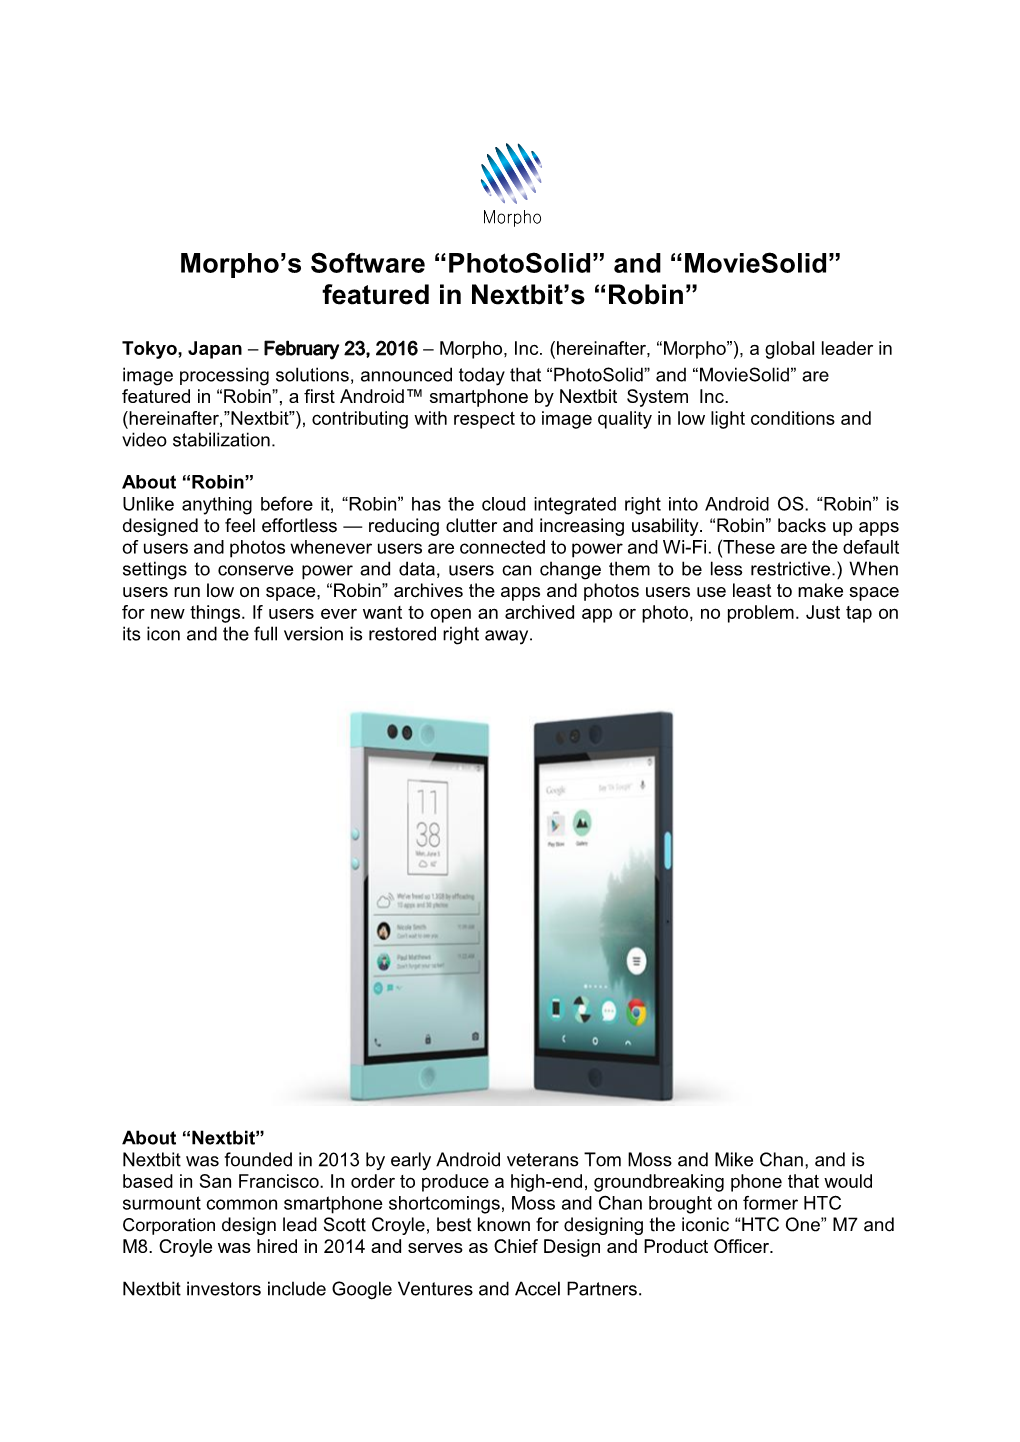 Morpho's Software “Photosolid” and “Moviesolid” Featured in Nextbit's